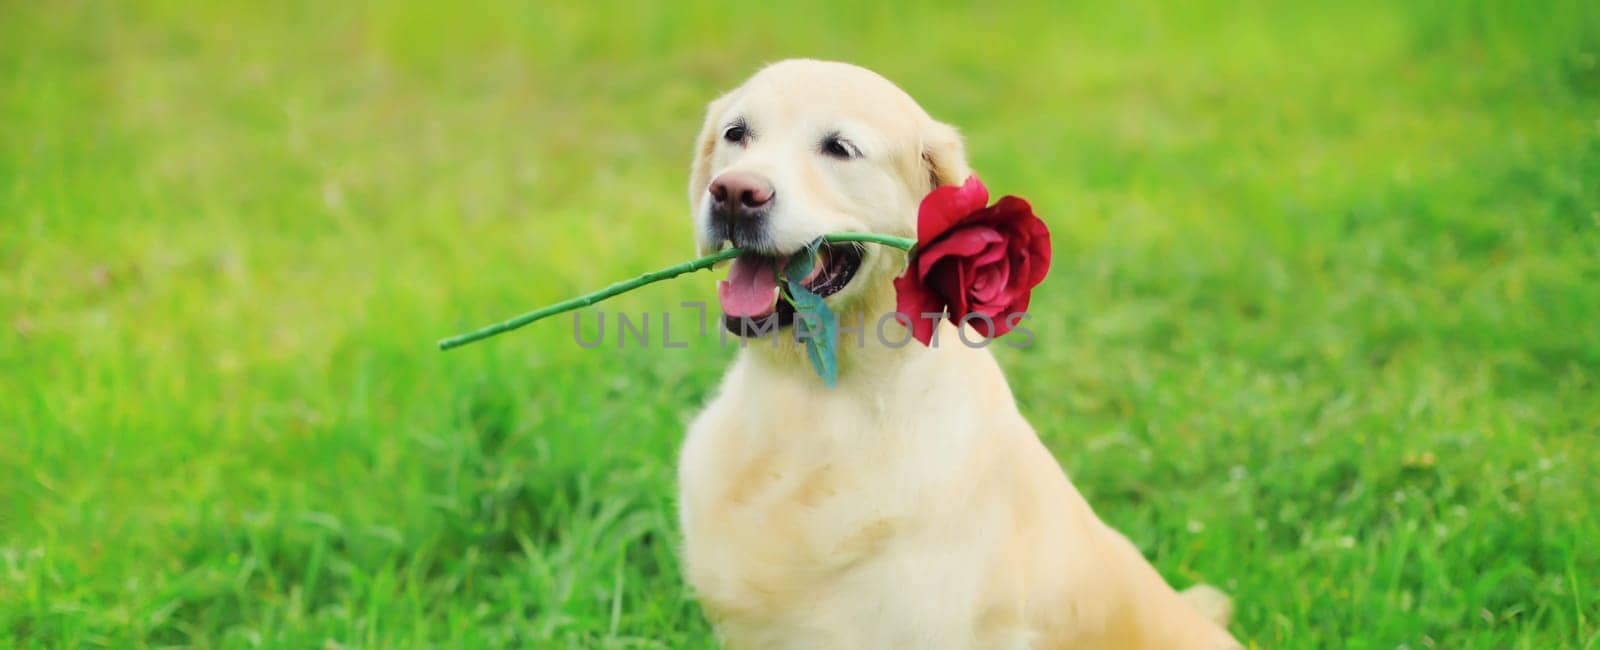 Golden Retriever dog holding flower rose in mouth in summer park by Rohappy